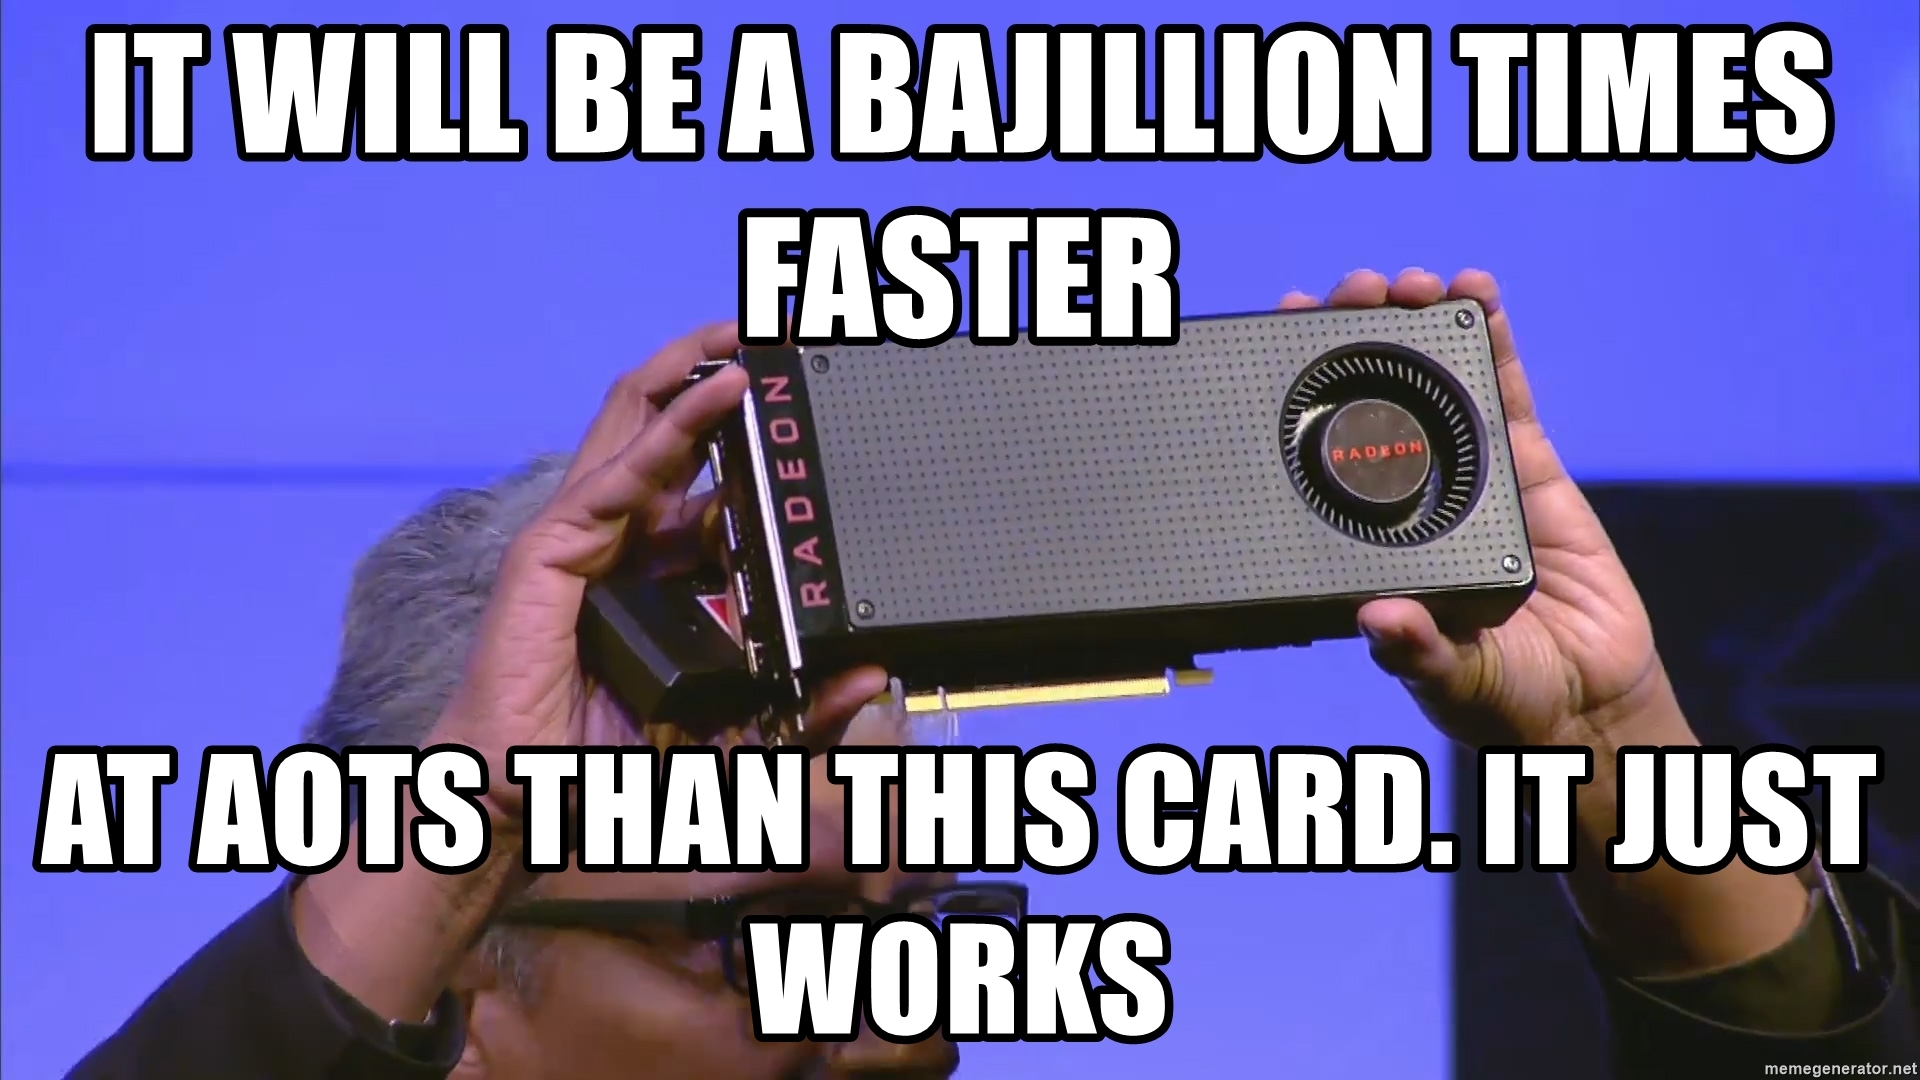 it-will-be-a-bajillion-times-faster-at-aots-than-this-card-it-just-works.jpg